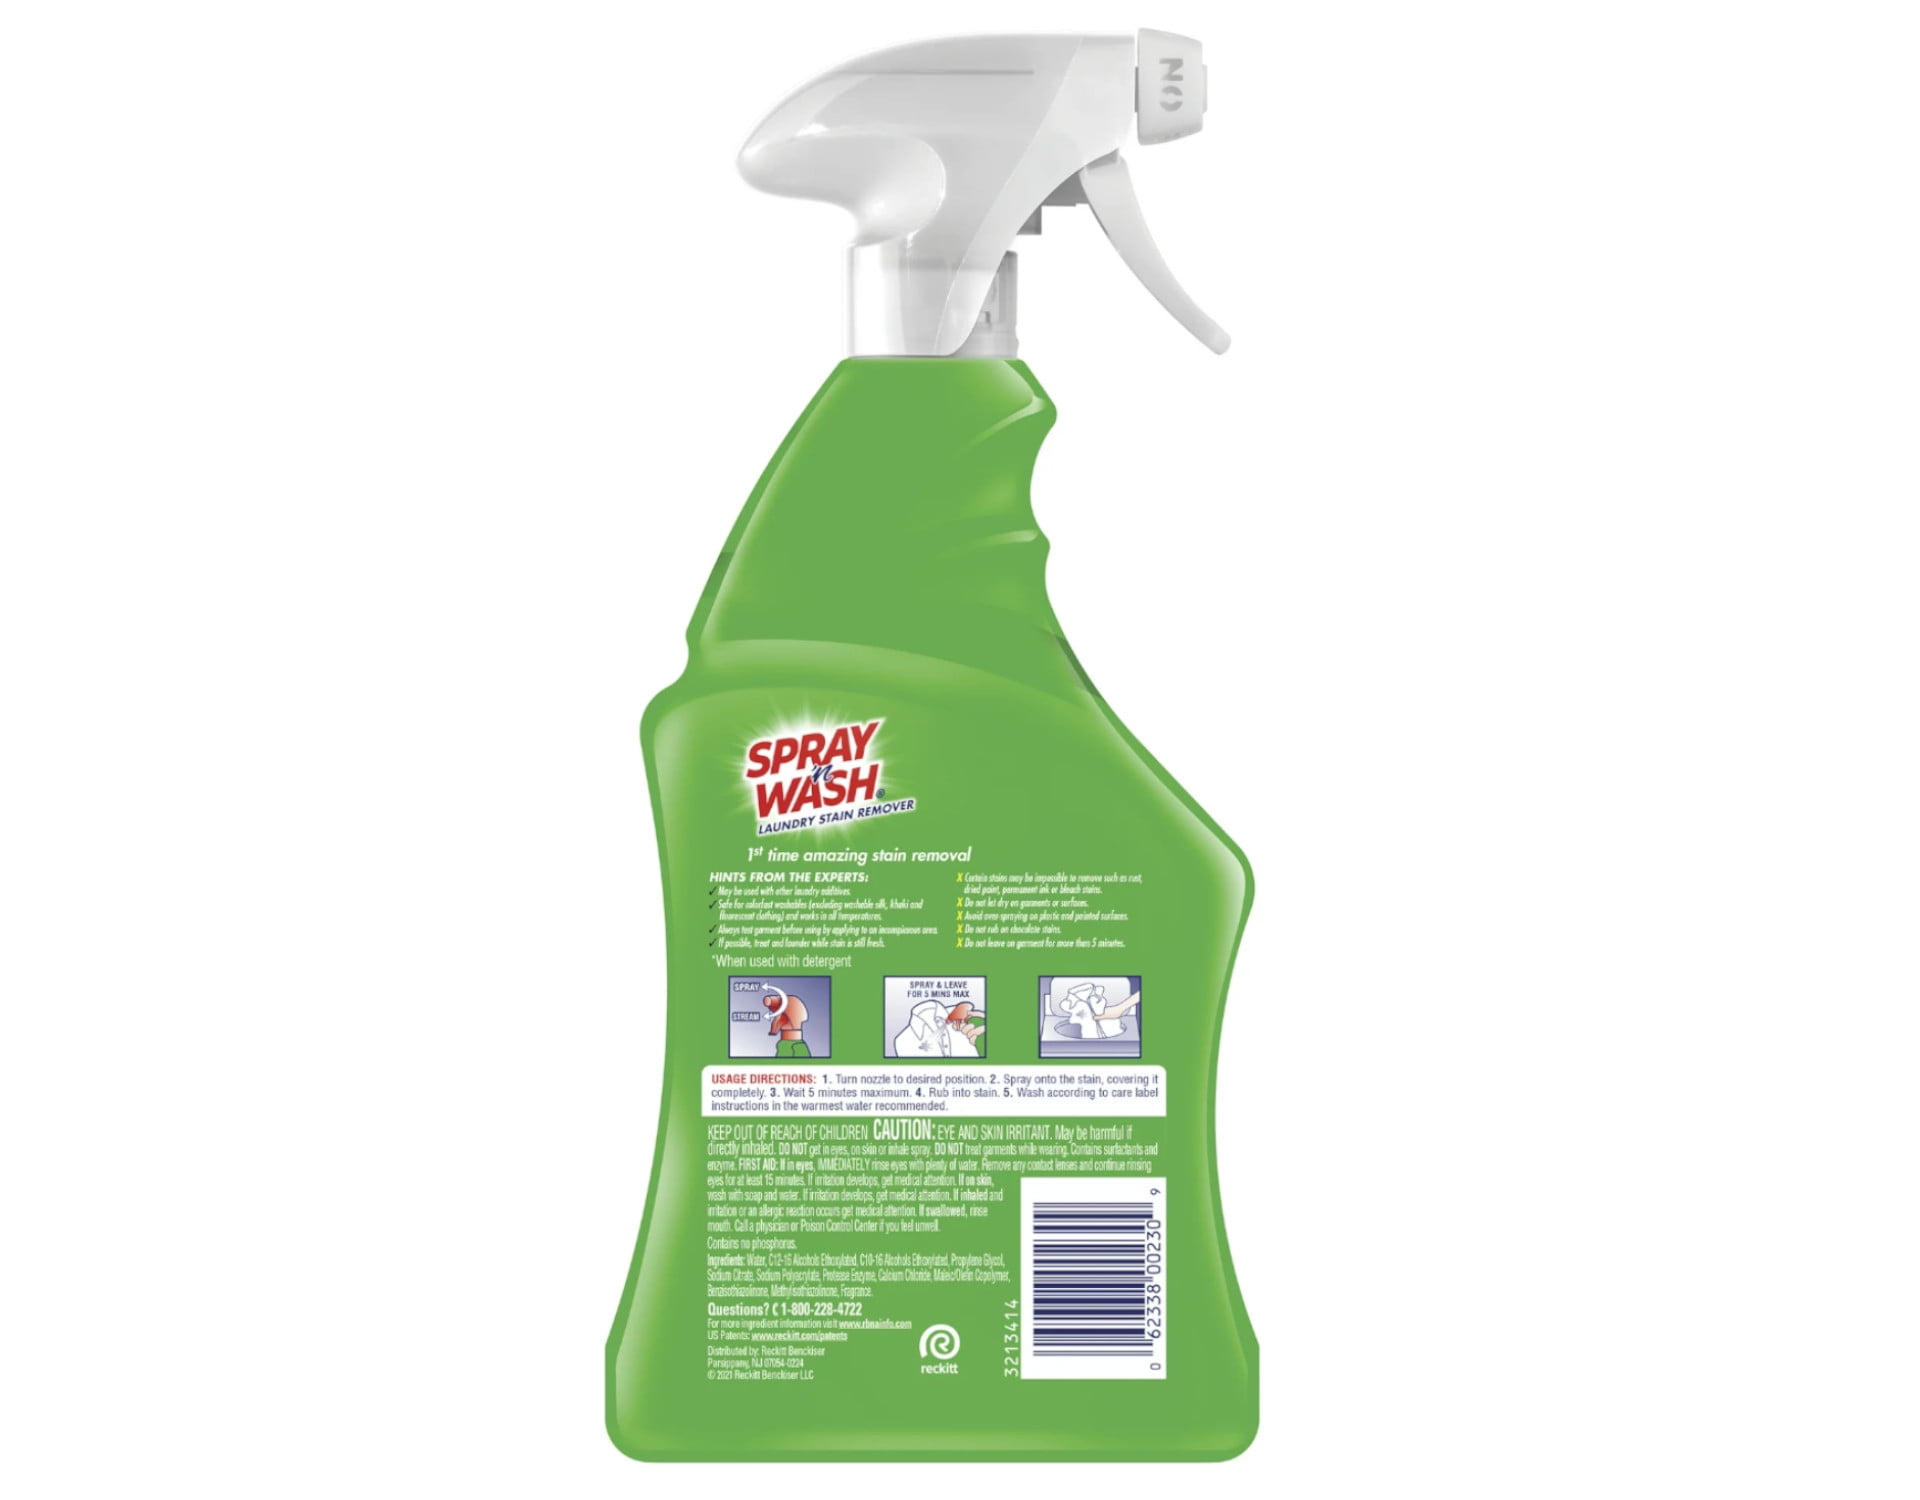 Spray 'n Wash Laundry Stain Remover only $1.29! - Kroger Krazy